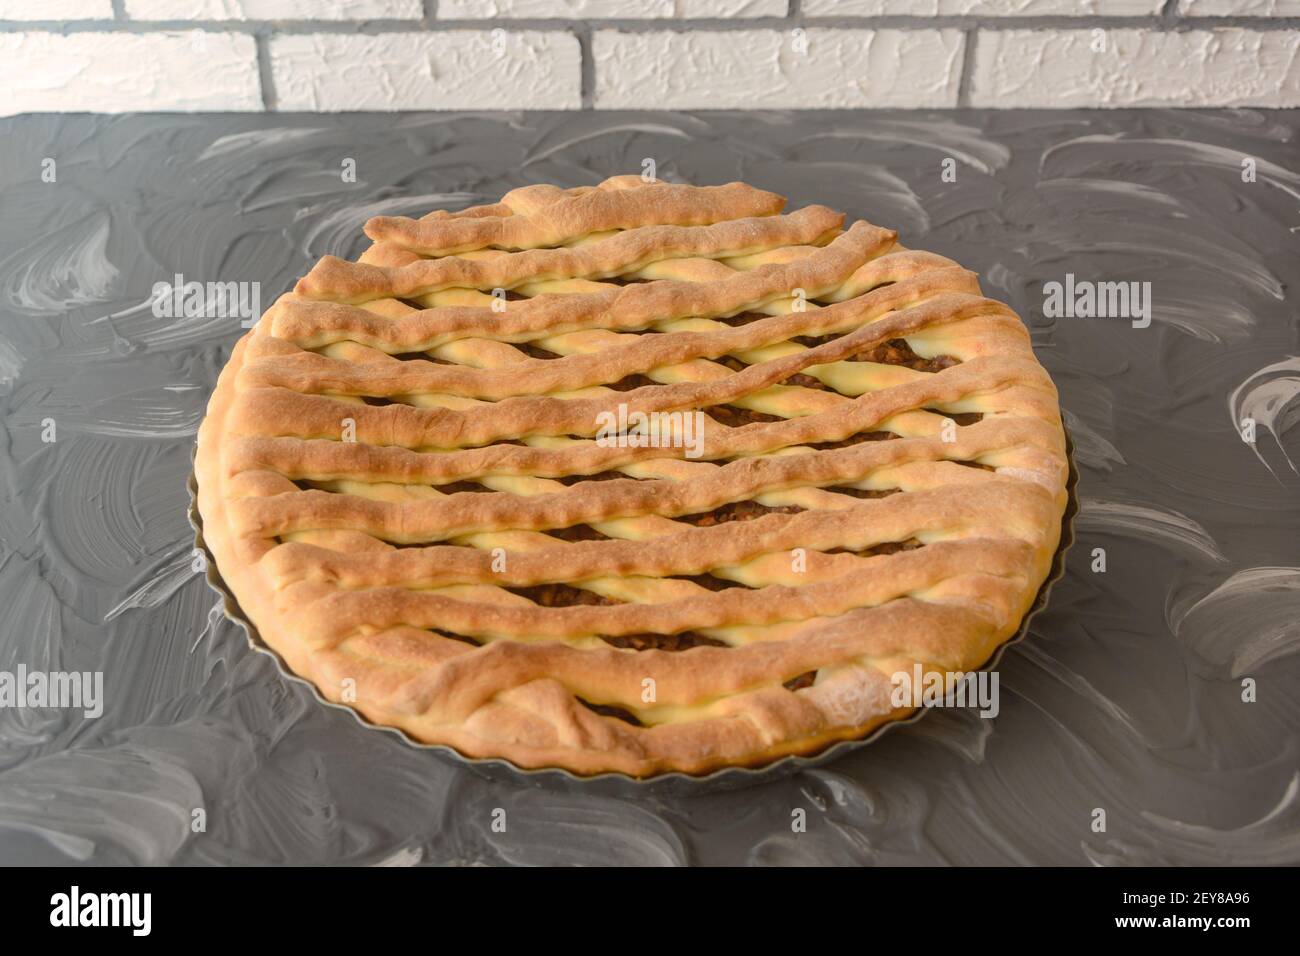 Homemade yeast dough pie. Pastries with sweet fruit filling. Close-up, selective focus. Stock Photo